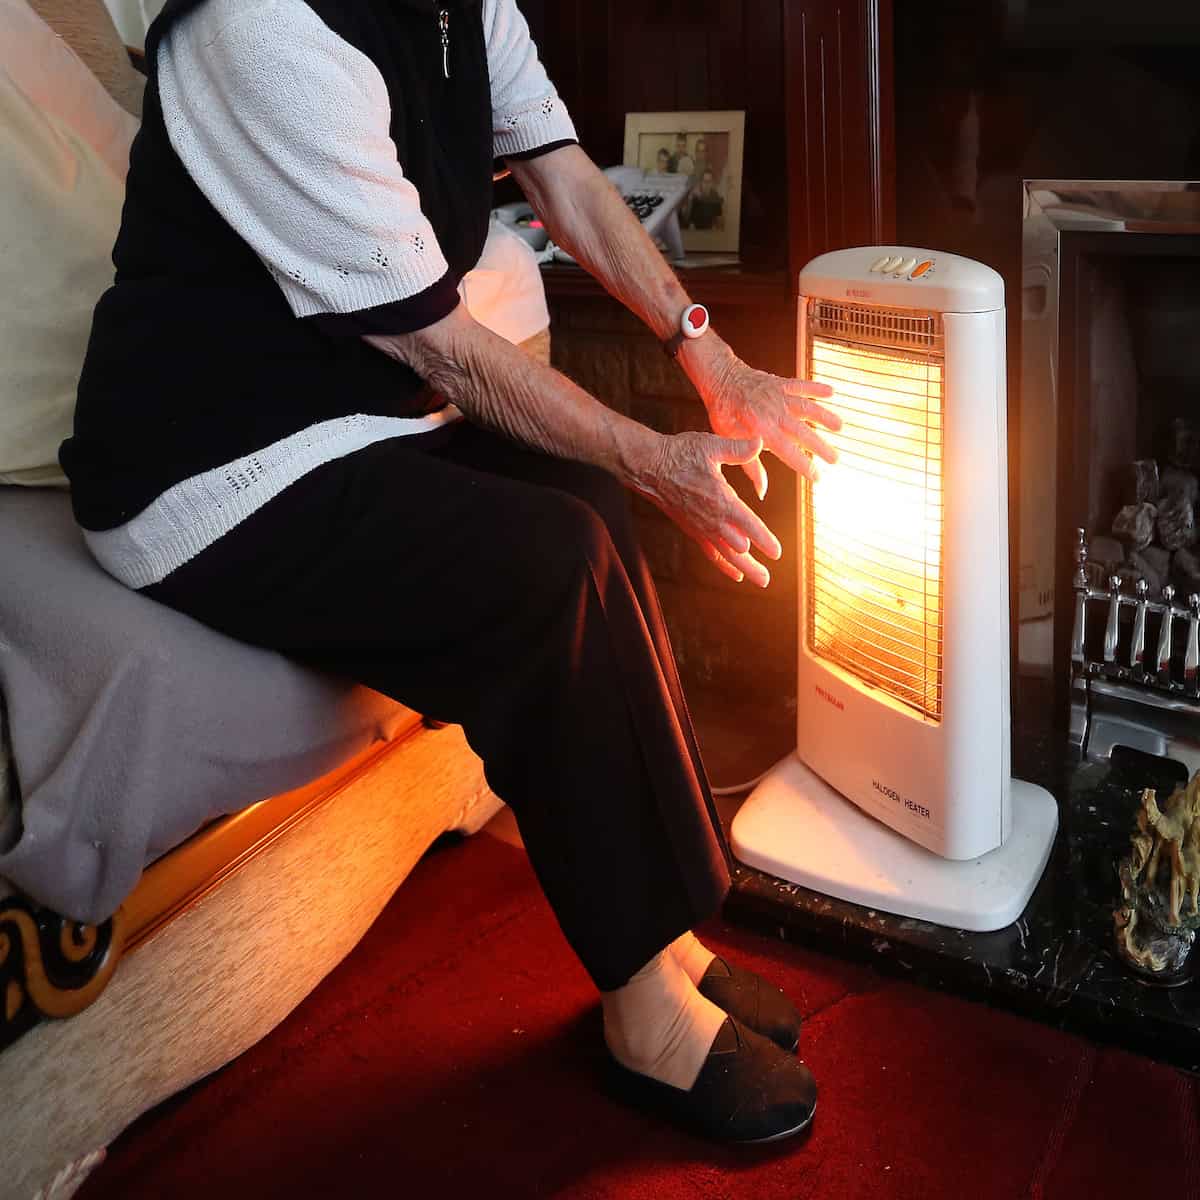 ‘Ofgem to blame’ as energy bills set to hit £4,200 in January